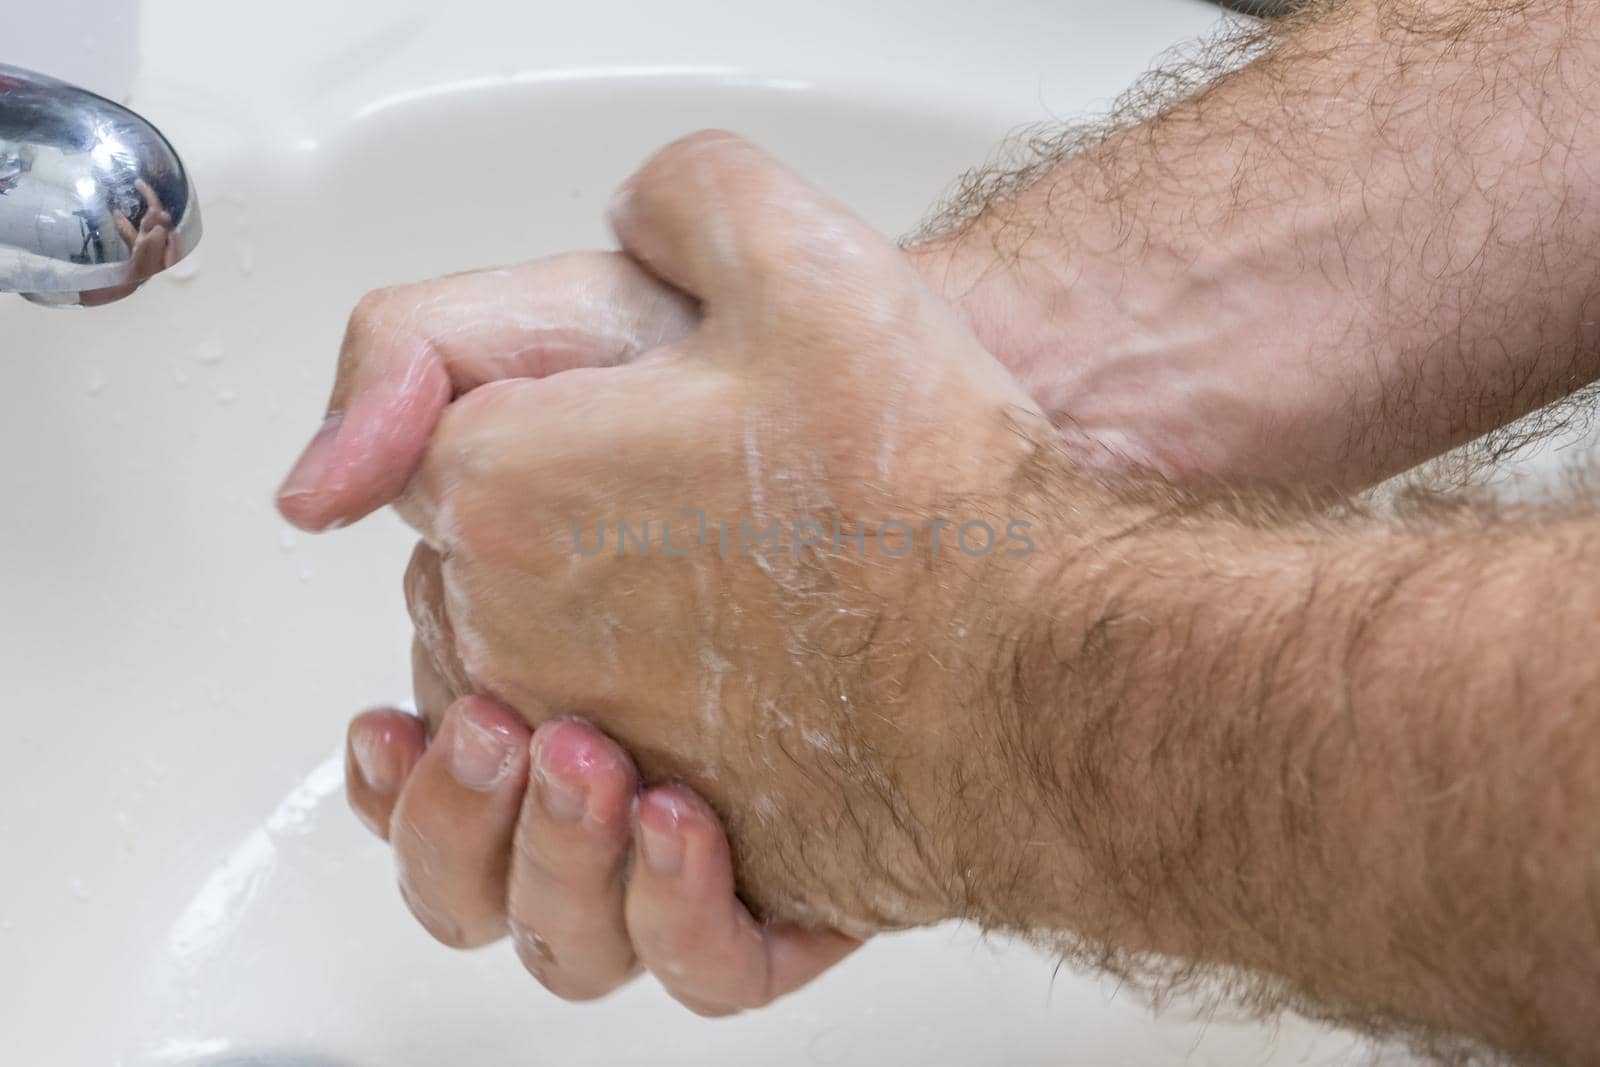 Man washing hands in basin close-up by imagesbykenny